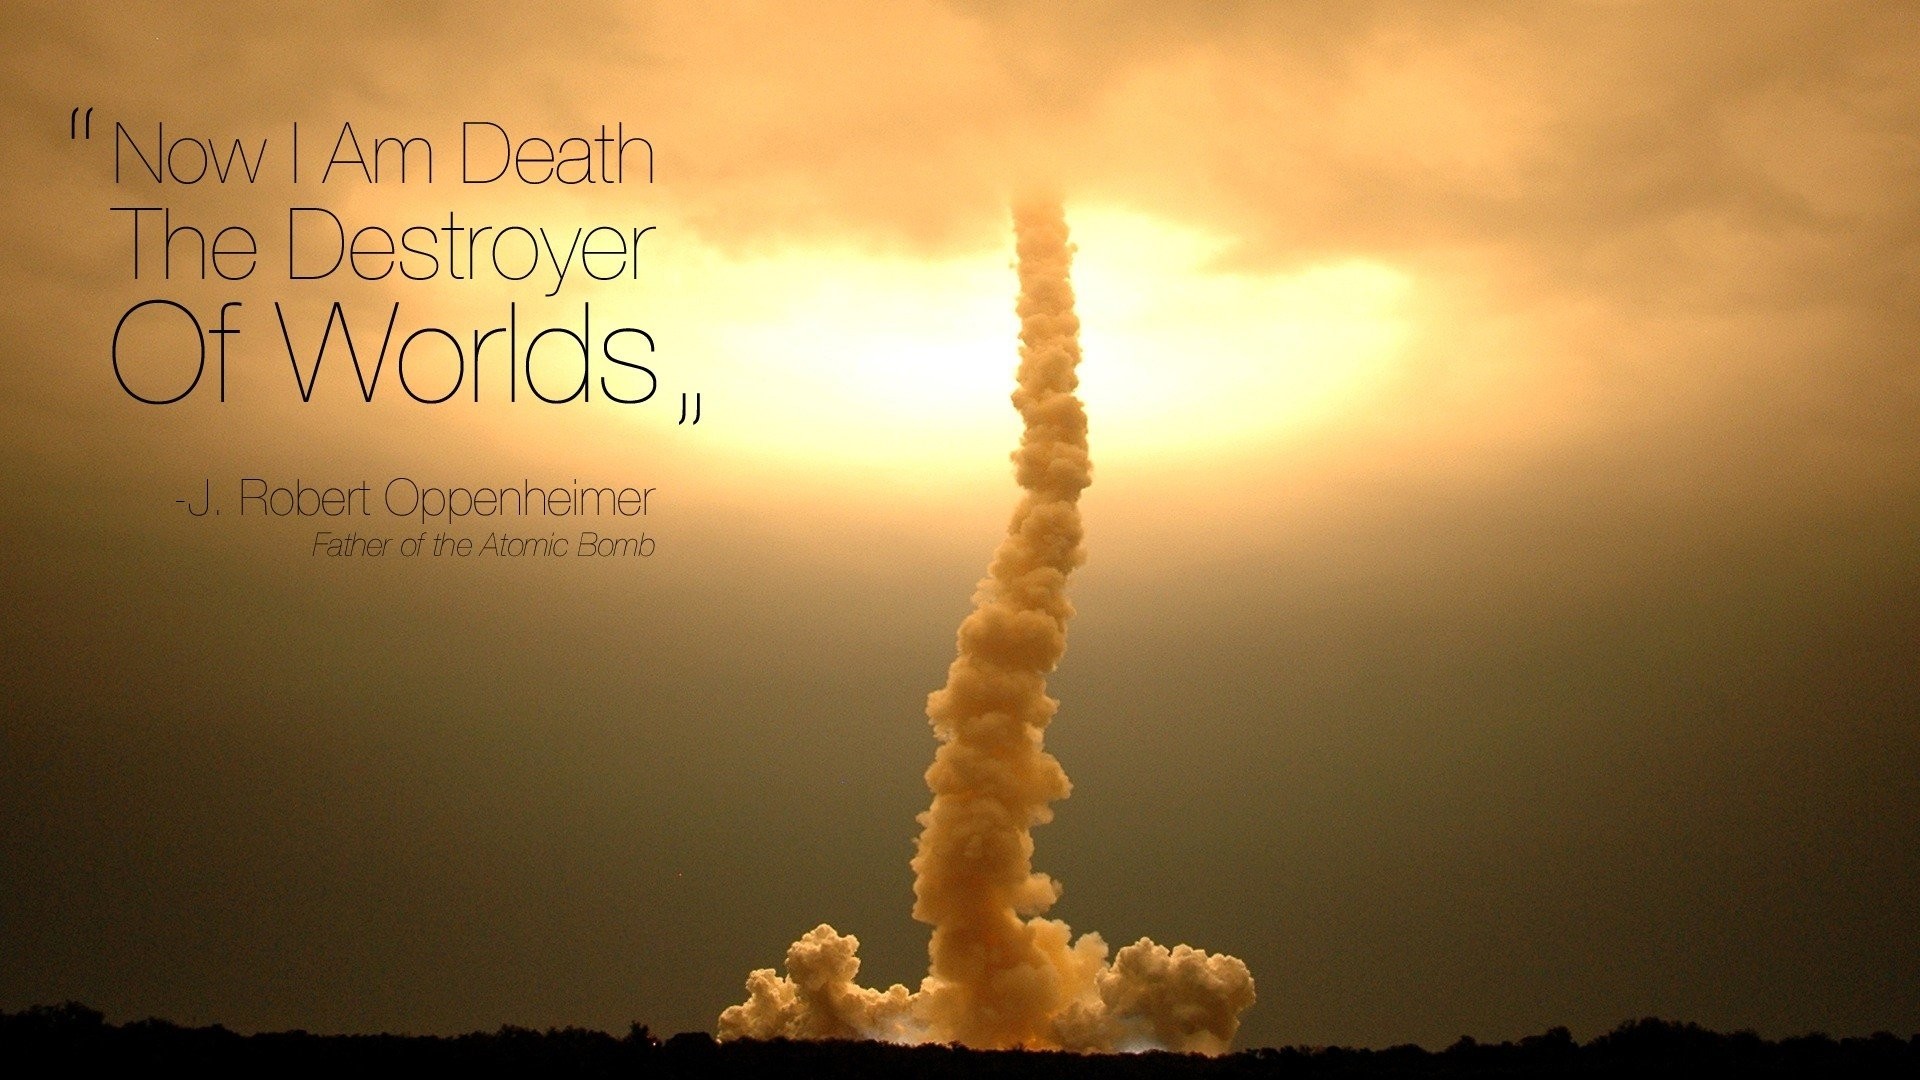 1920x1080 Bhagavad Gita Launch Oppenheimer Quotes Rocket Skyscapes